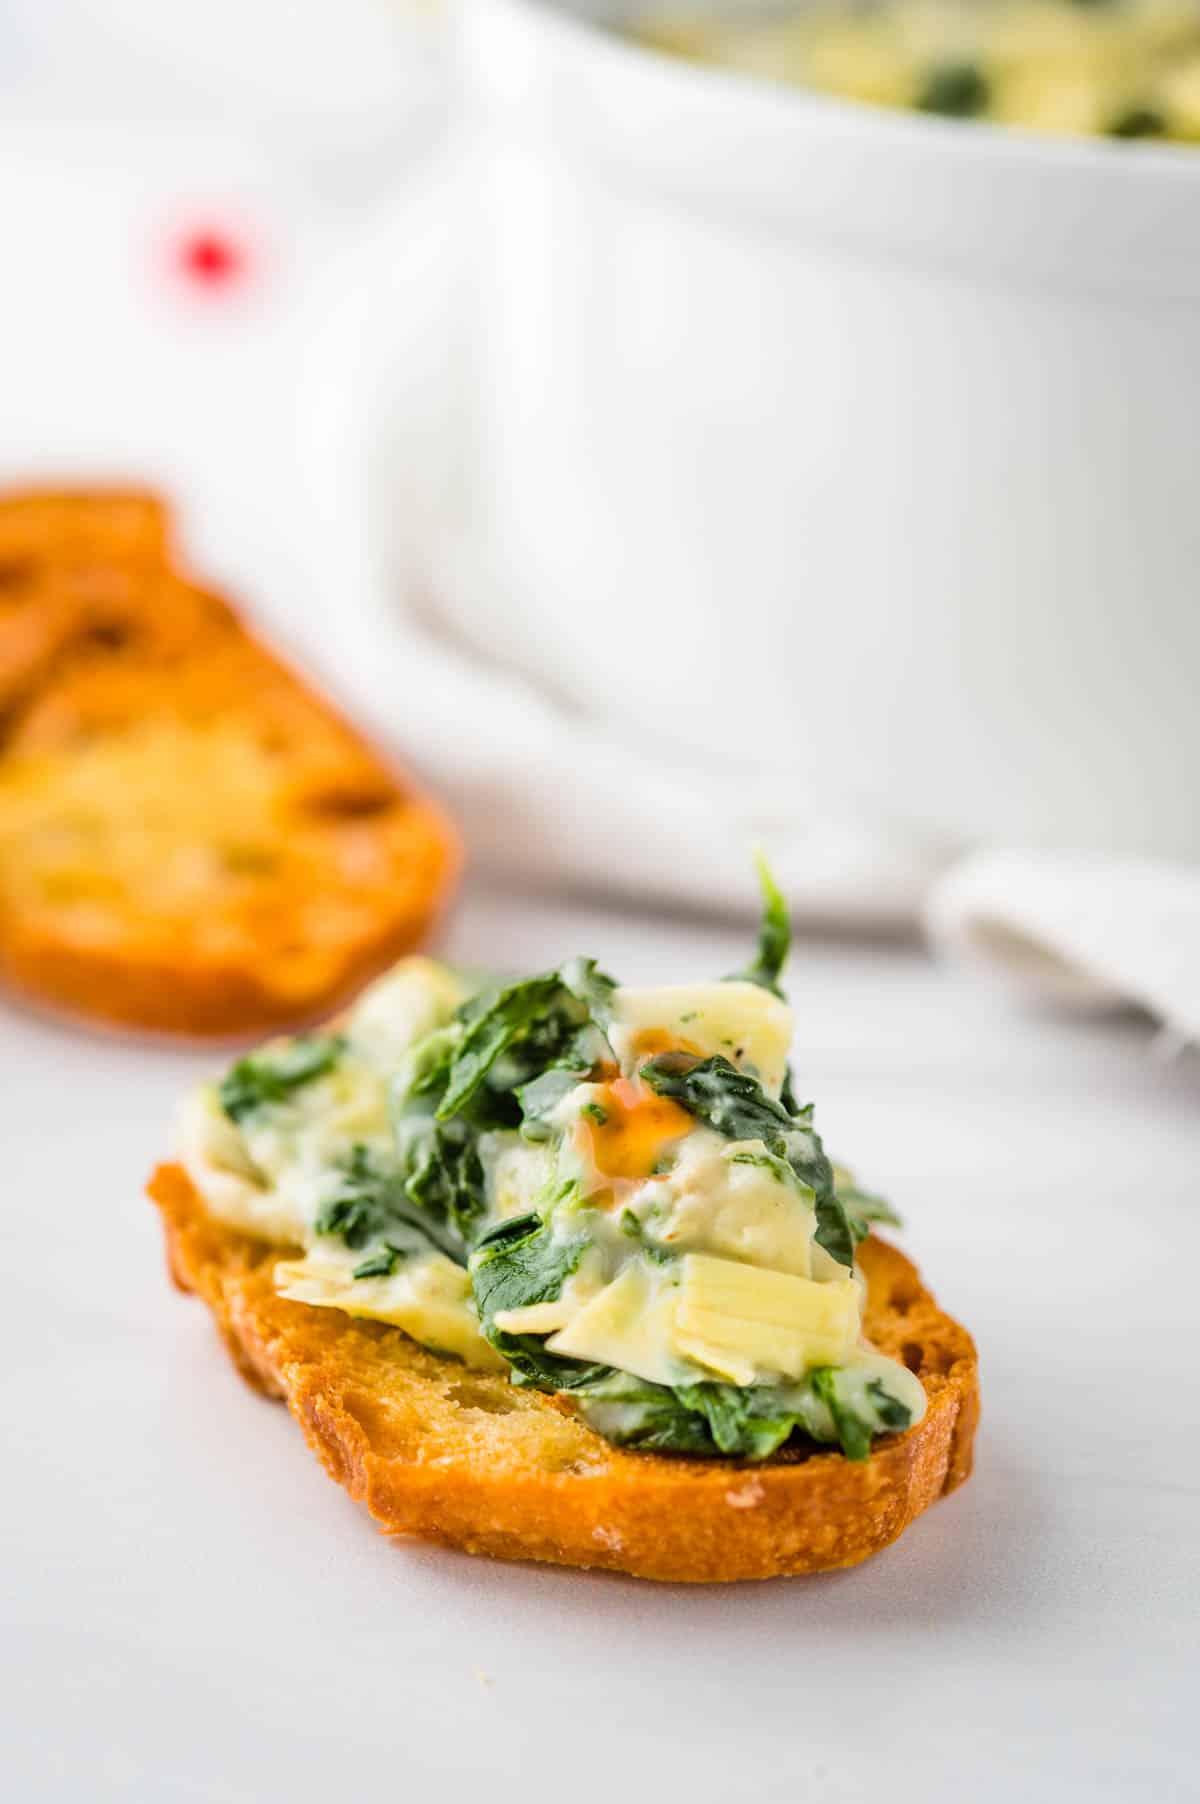 A crunchy crostini cracker topped with warm baked spinach artichoke dip.